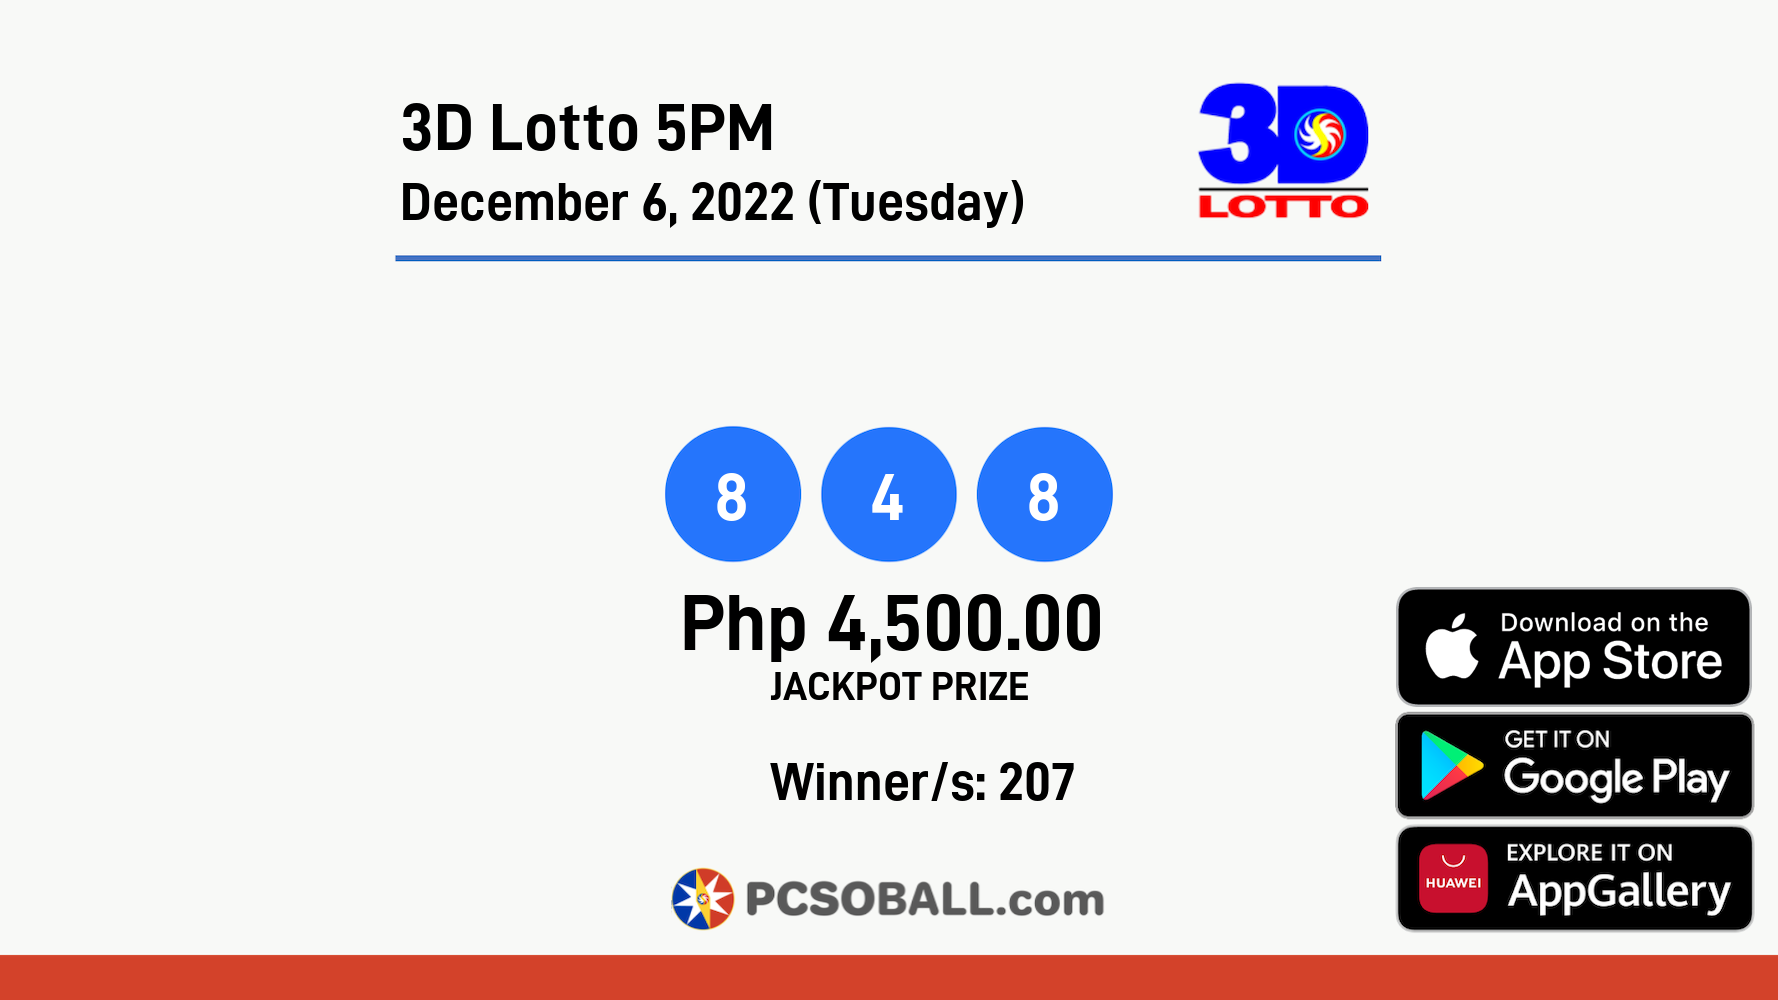 3D Lotto 5PM December 6, 2022 (Tuesday) Result